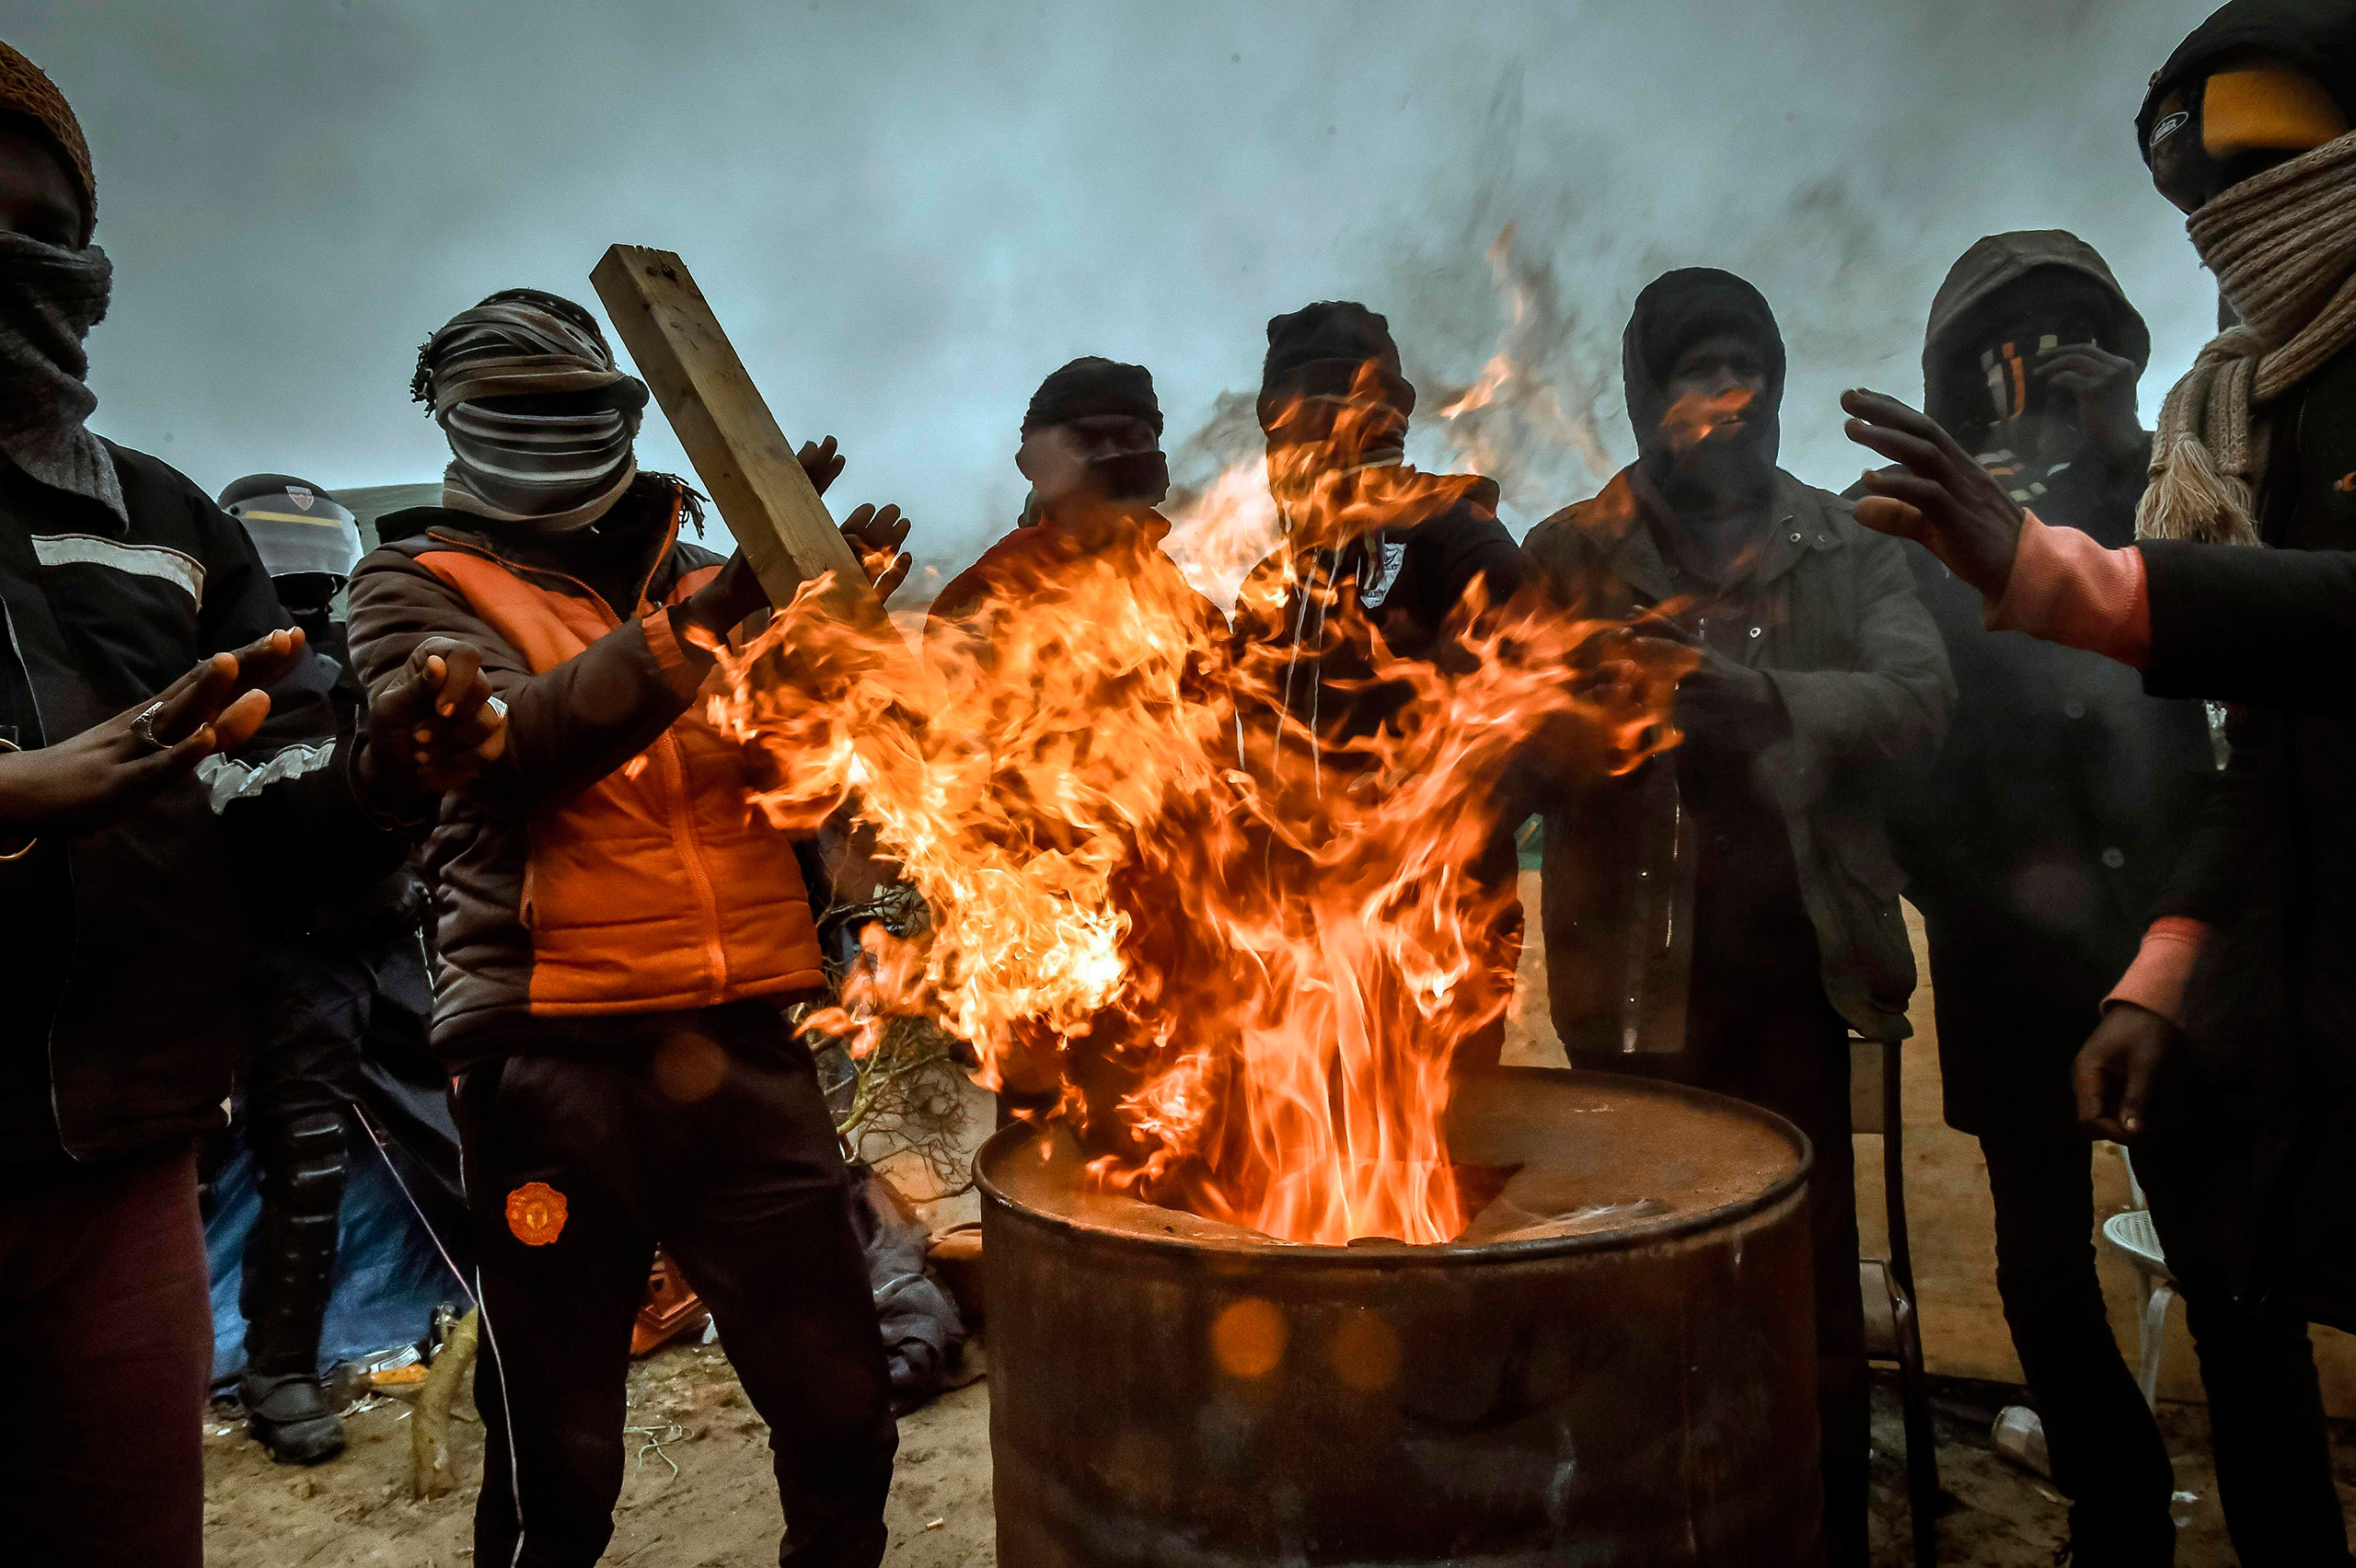 Migrants keep warm around a fire in a trash can as authorities dismantle shacks in the  Jungle  camp in Calais, France, March 1, 2016.